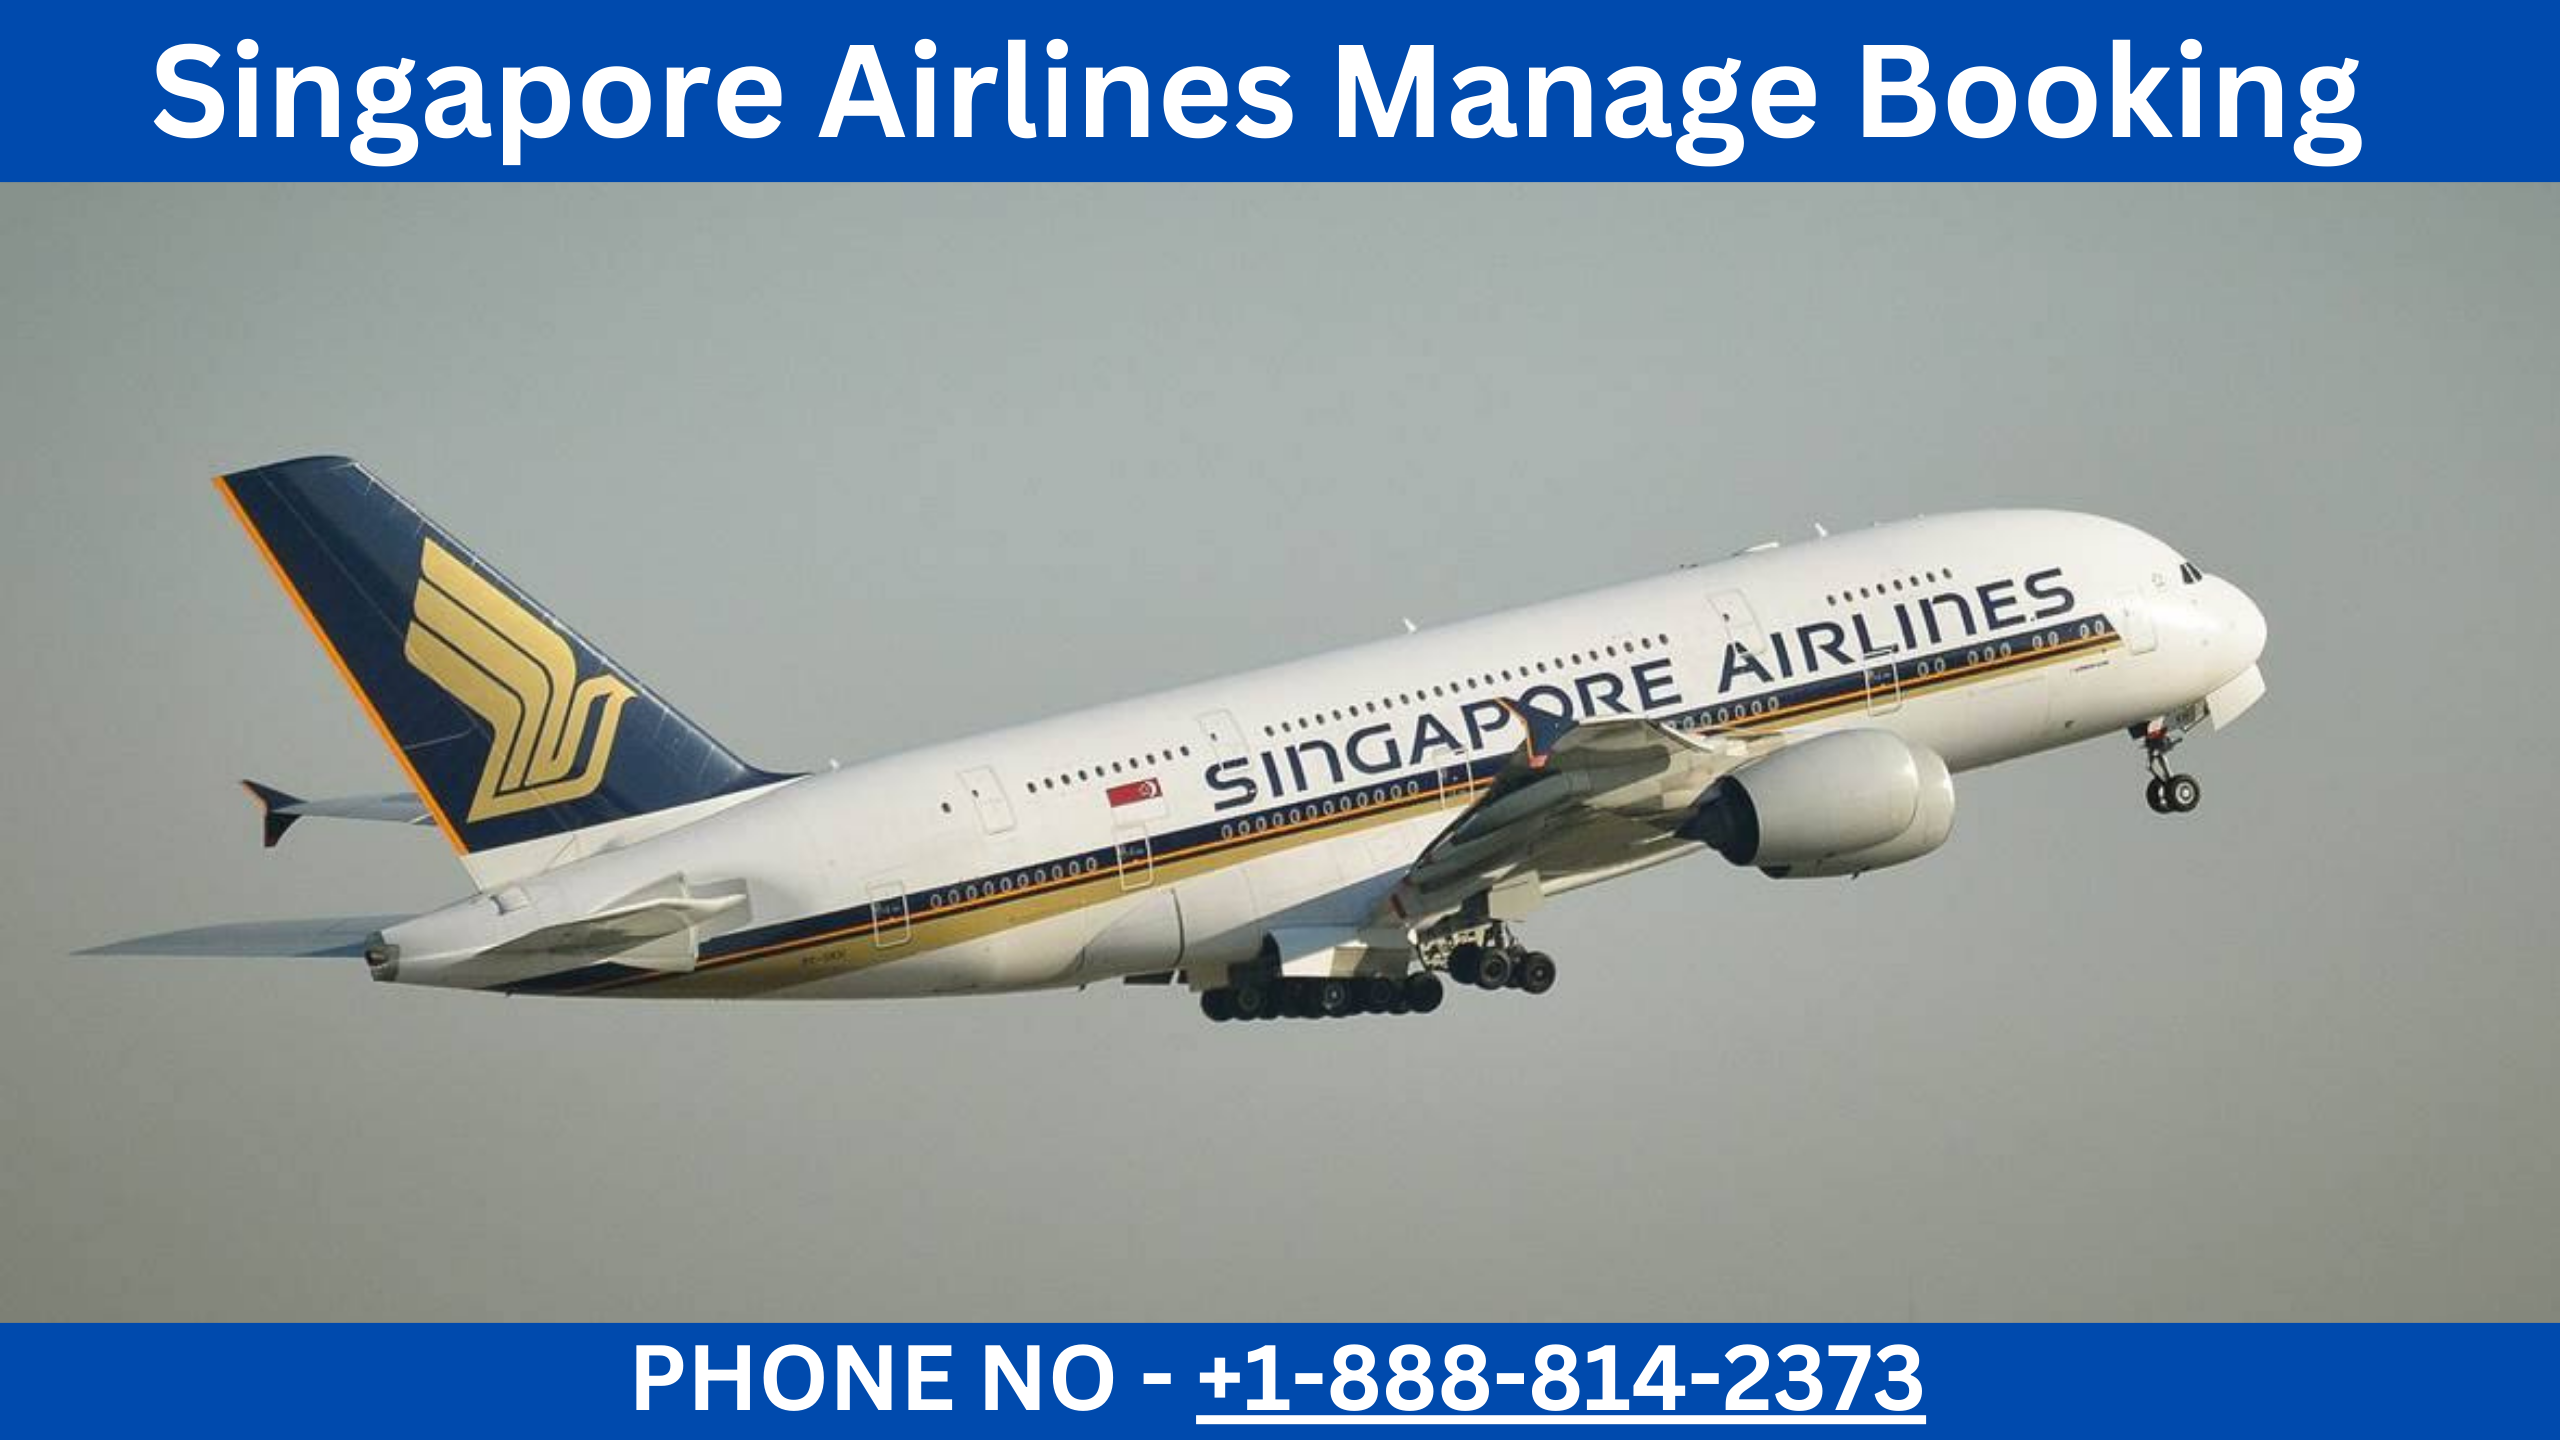 Singapore Airlines Manage Booking